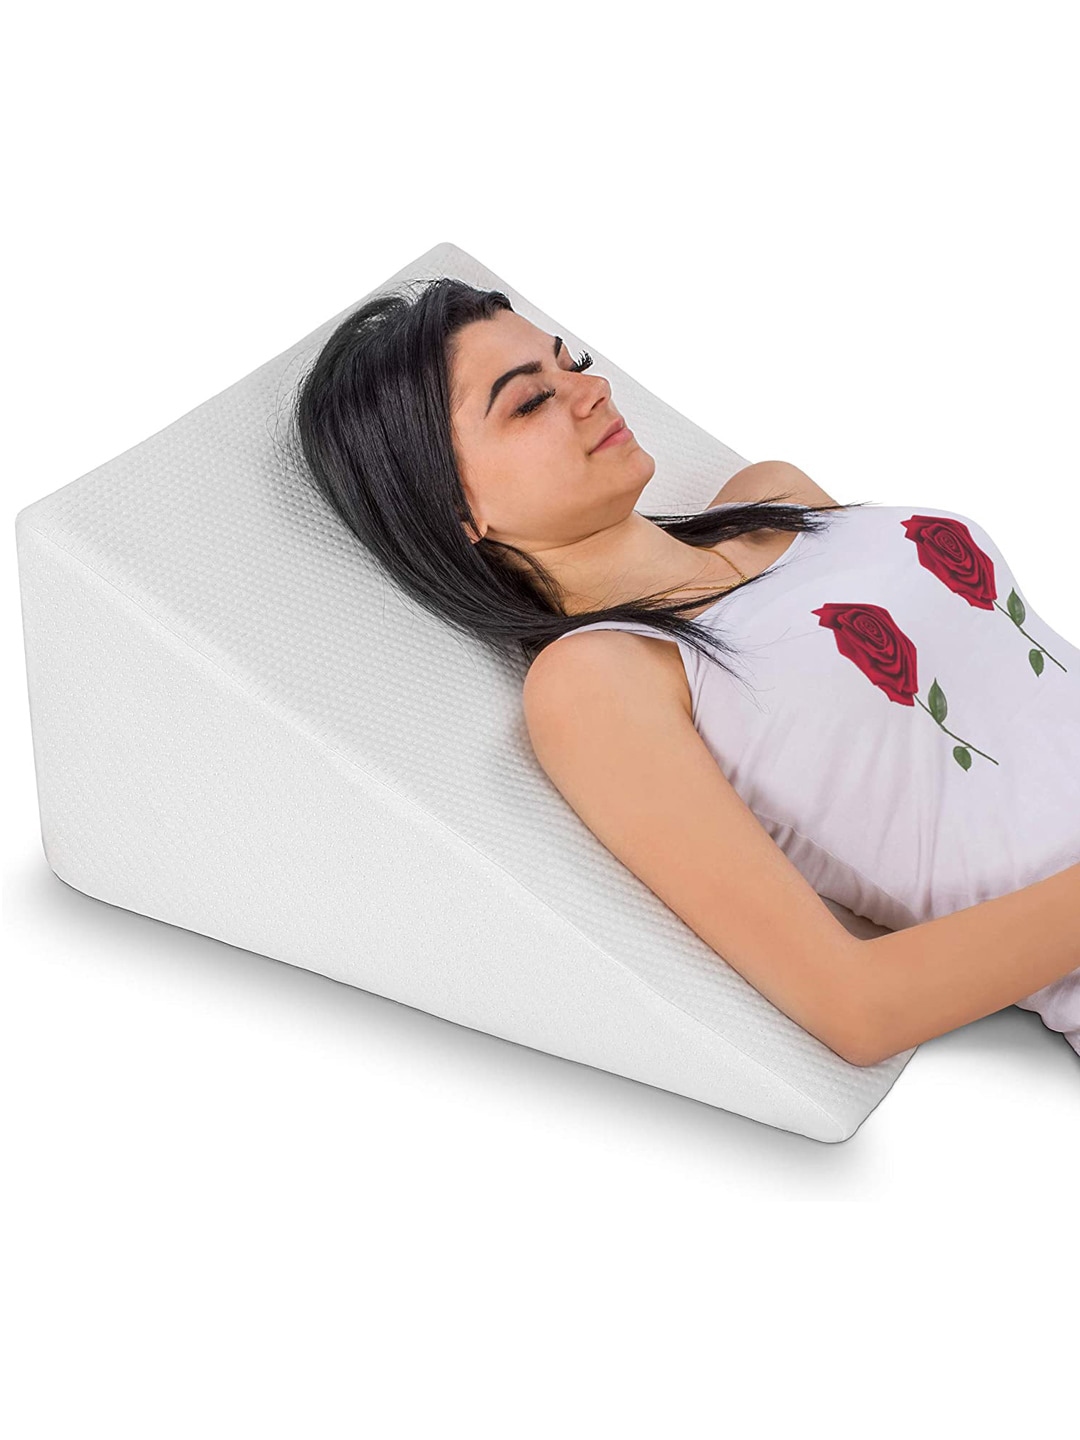 Kuber Industries White Bed Wedge Therapedic Pillow With Memory Foam